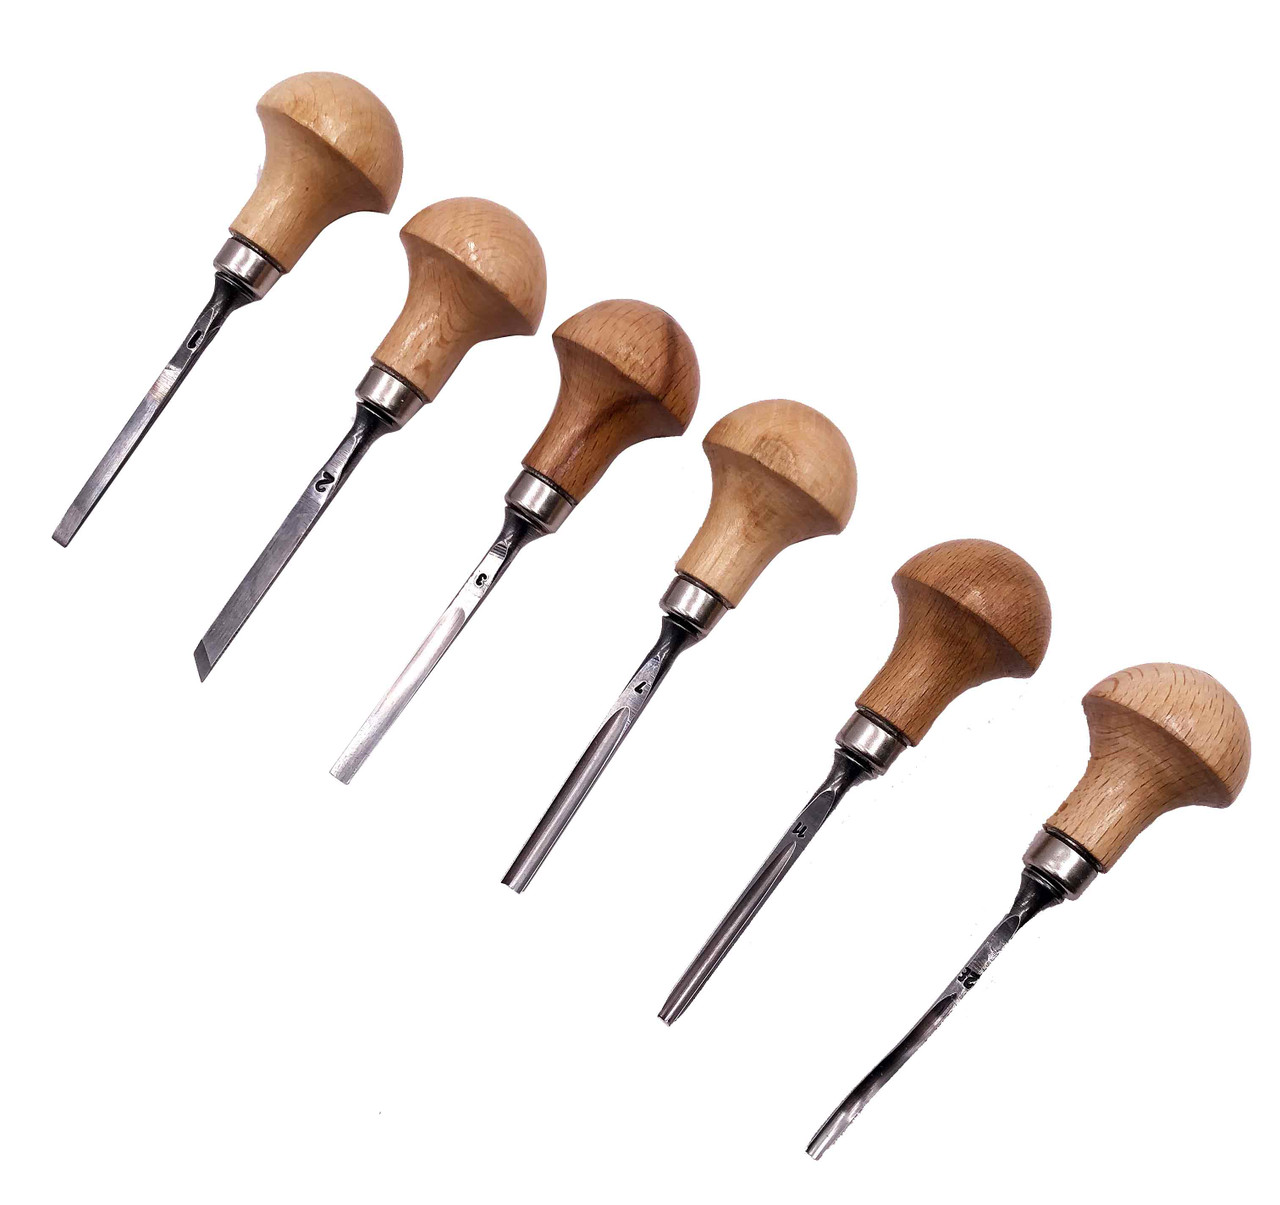 The 6 carving tools that are included in the Stubai Micro Carving Tool Set.